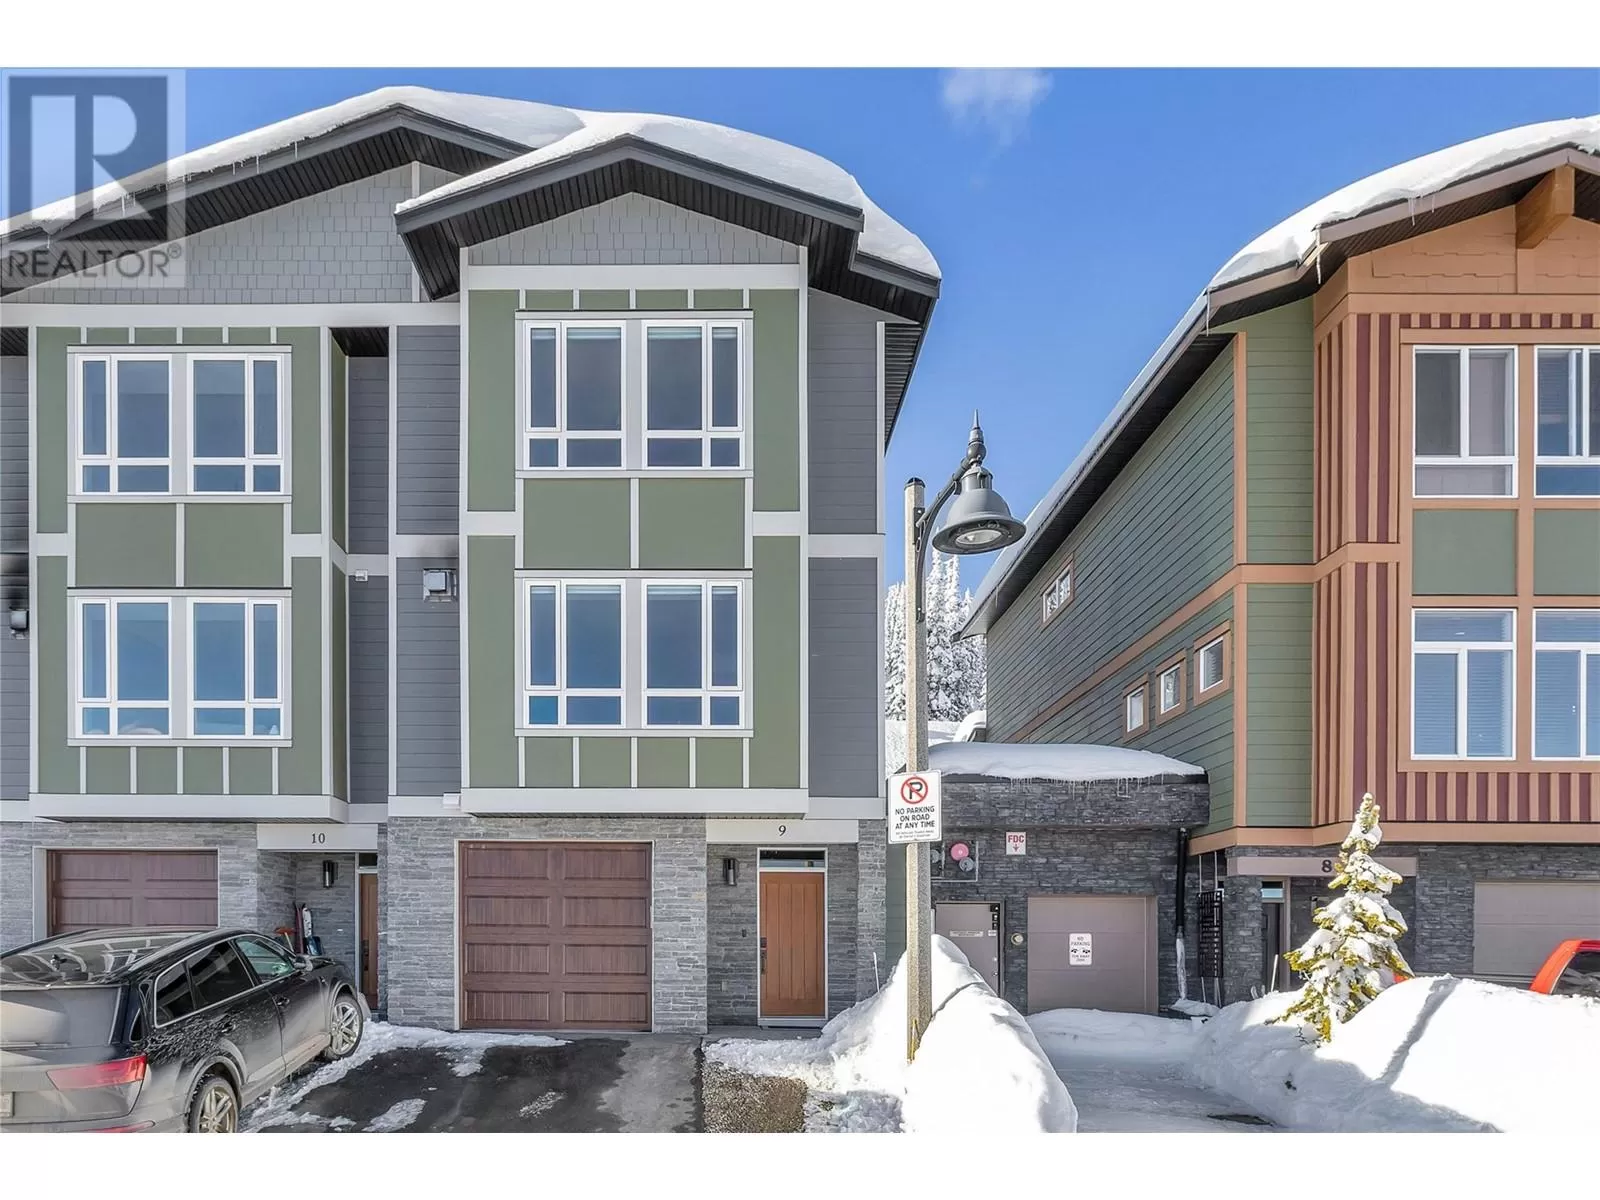 Row / Townhouse for rent: 120 Grizzly Ridge Trail Unit# 9, Big White, British Columbia V0H 1A0